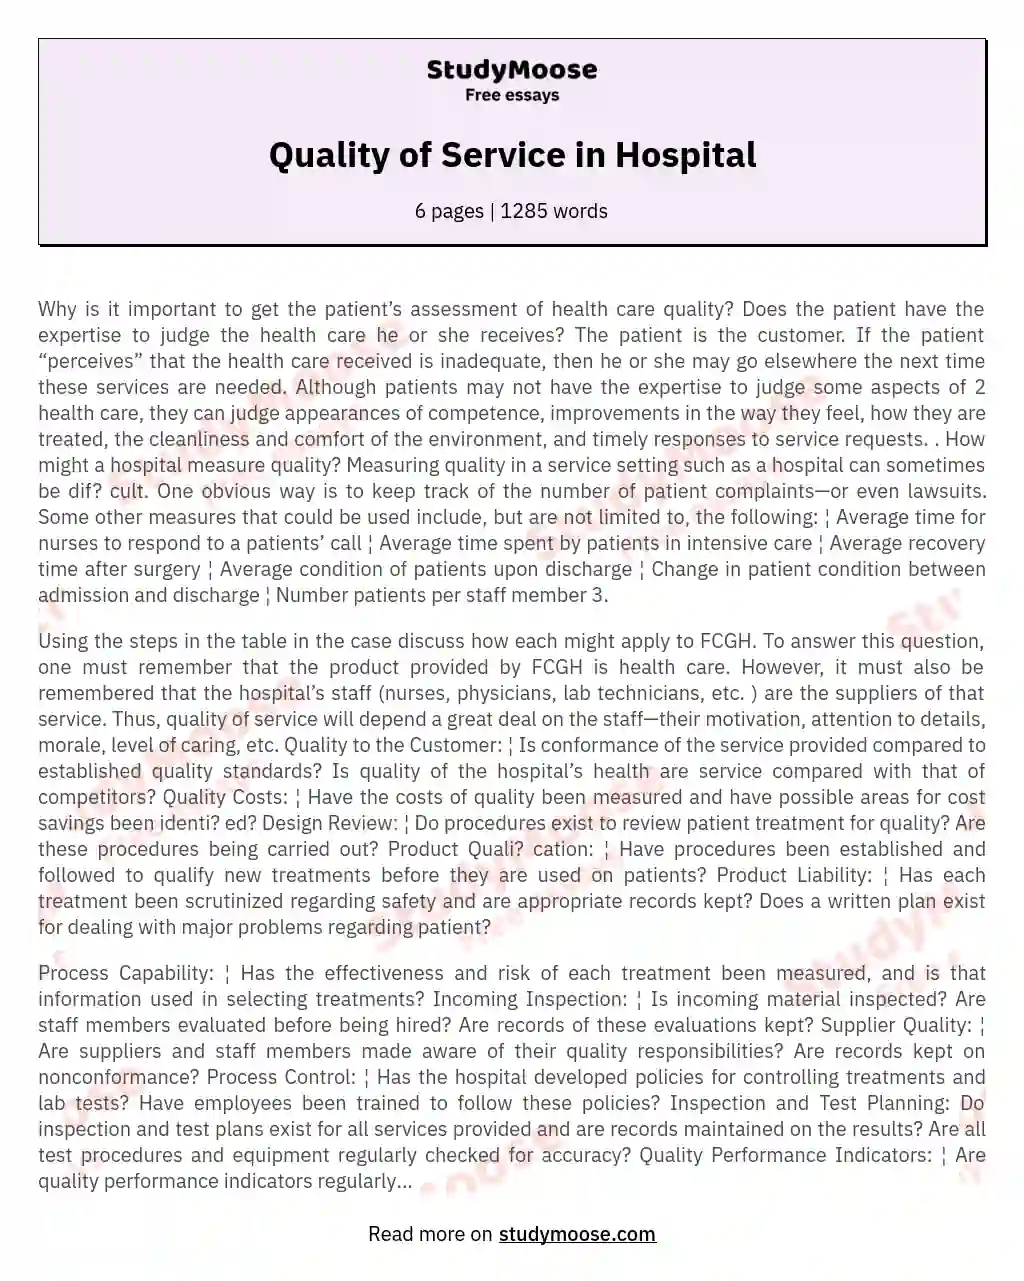 Quality of Service in Hospital essay